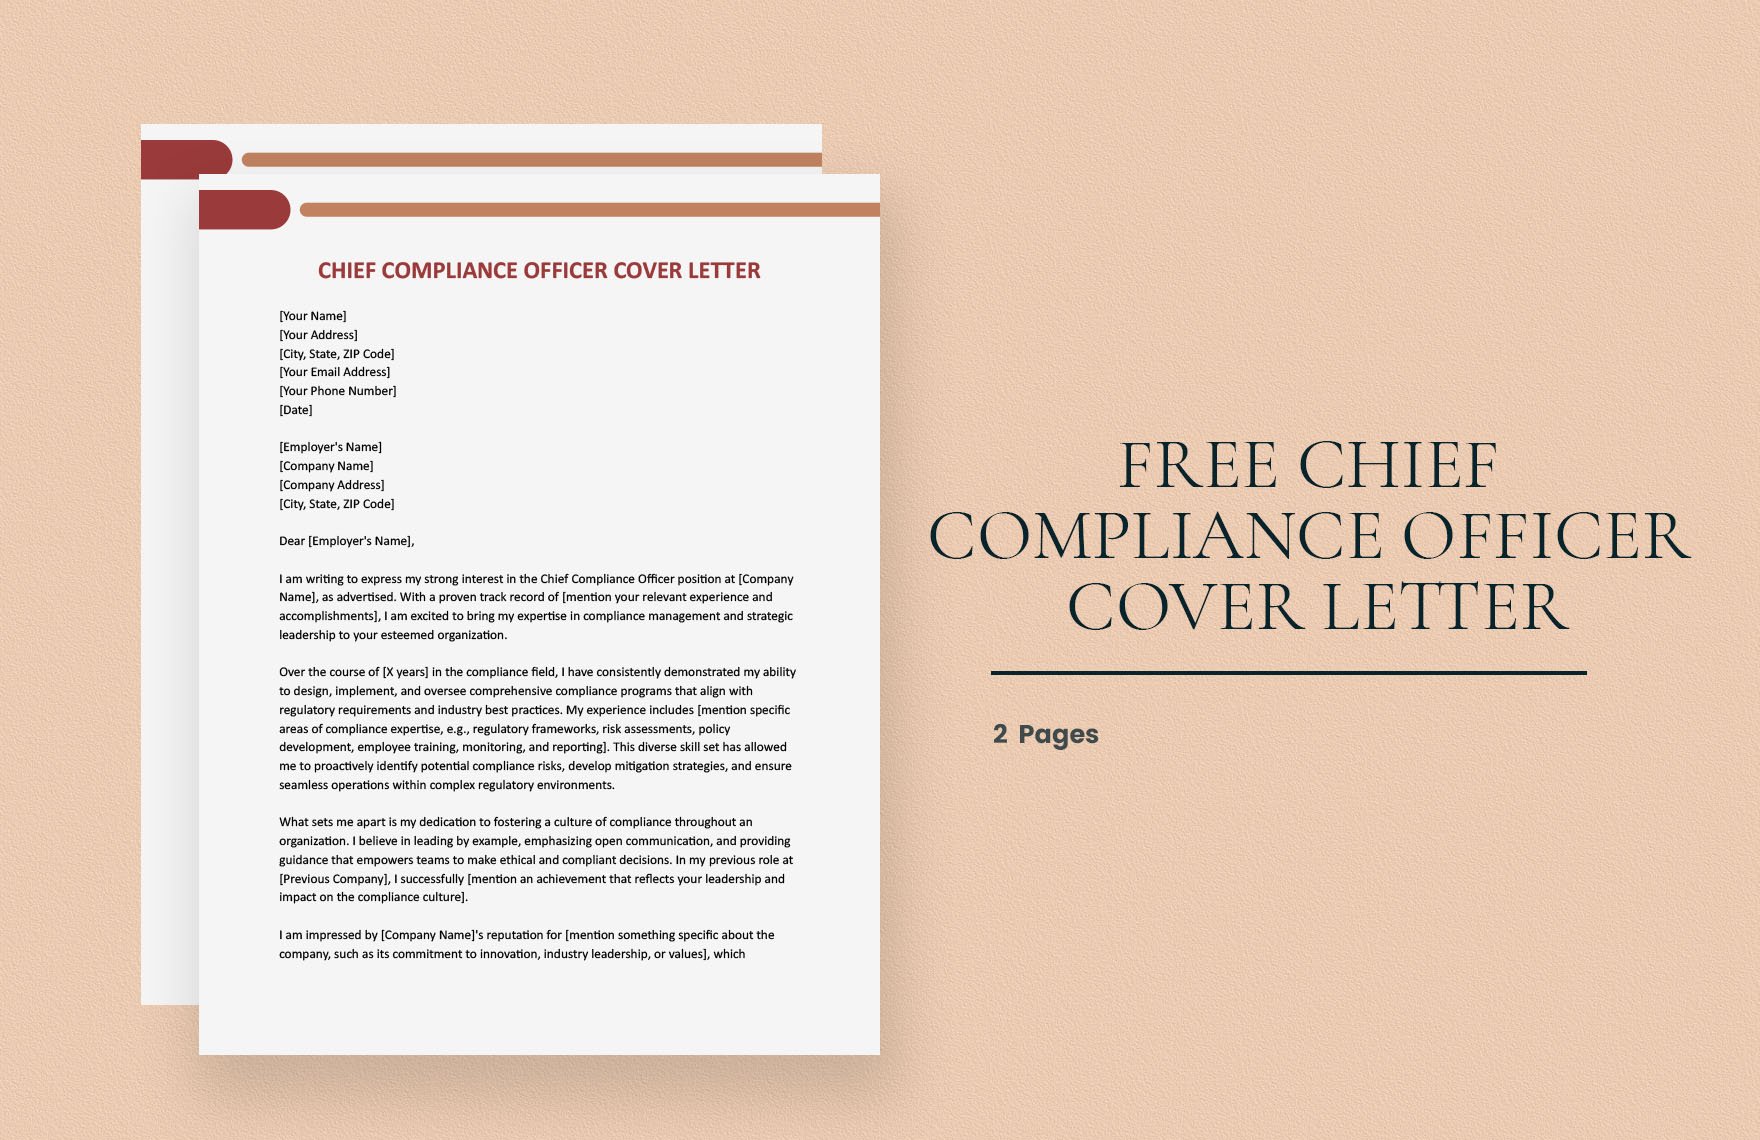 Chief Compliance Officer Cover Letter